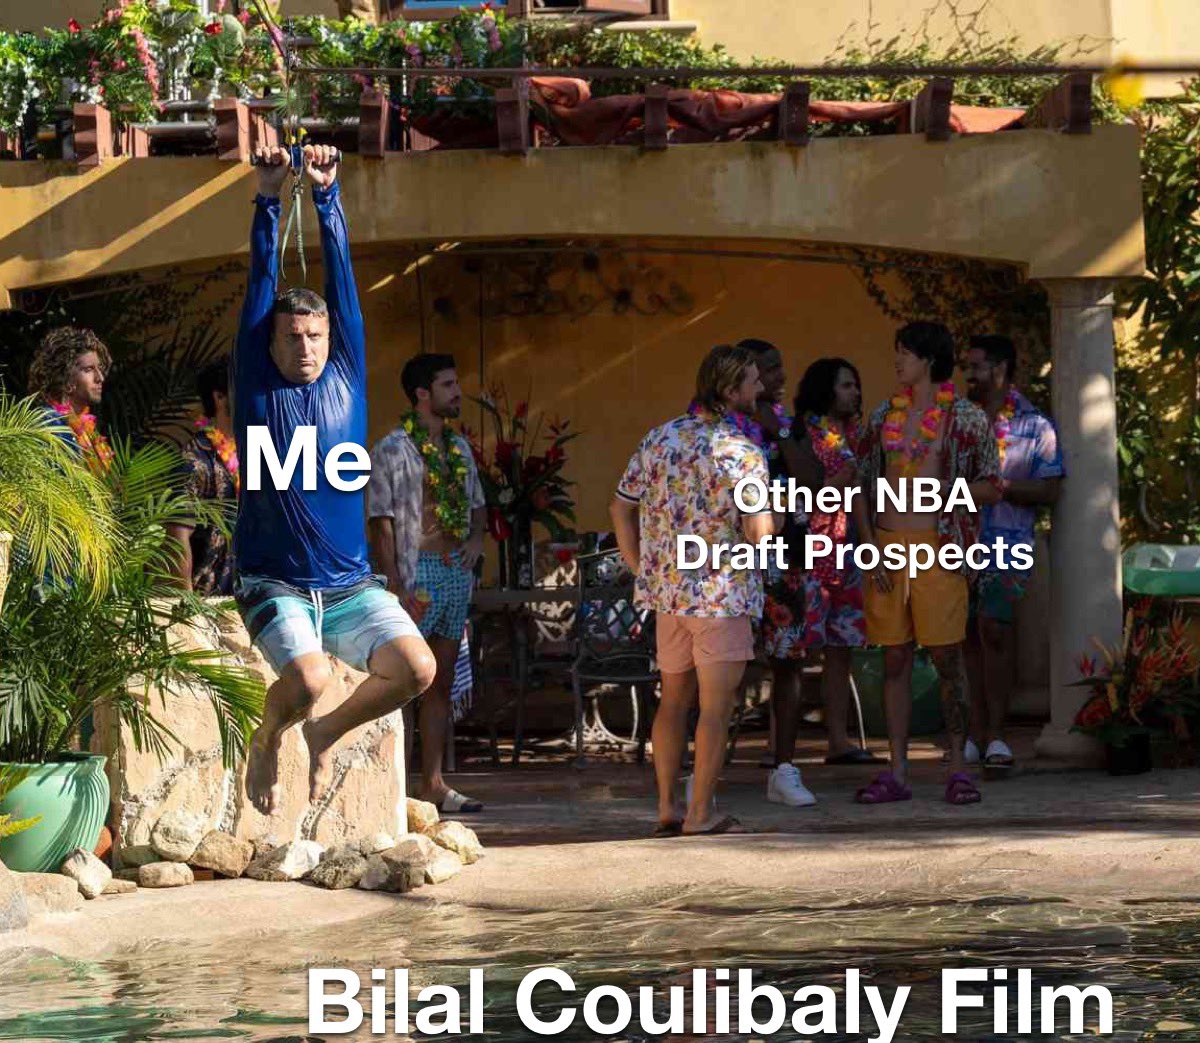 The people want to talk about Bilal Coulibaly 

#NBADraft